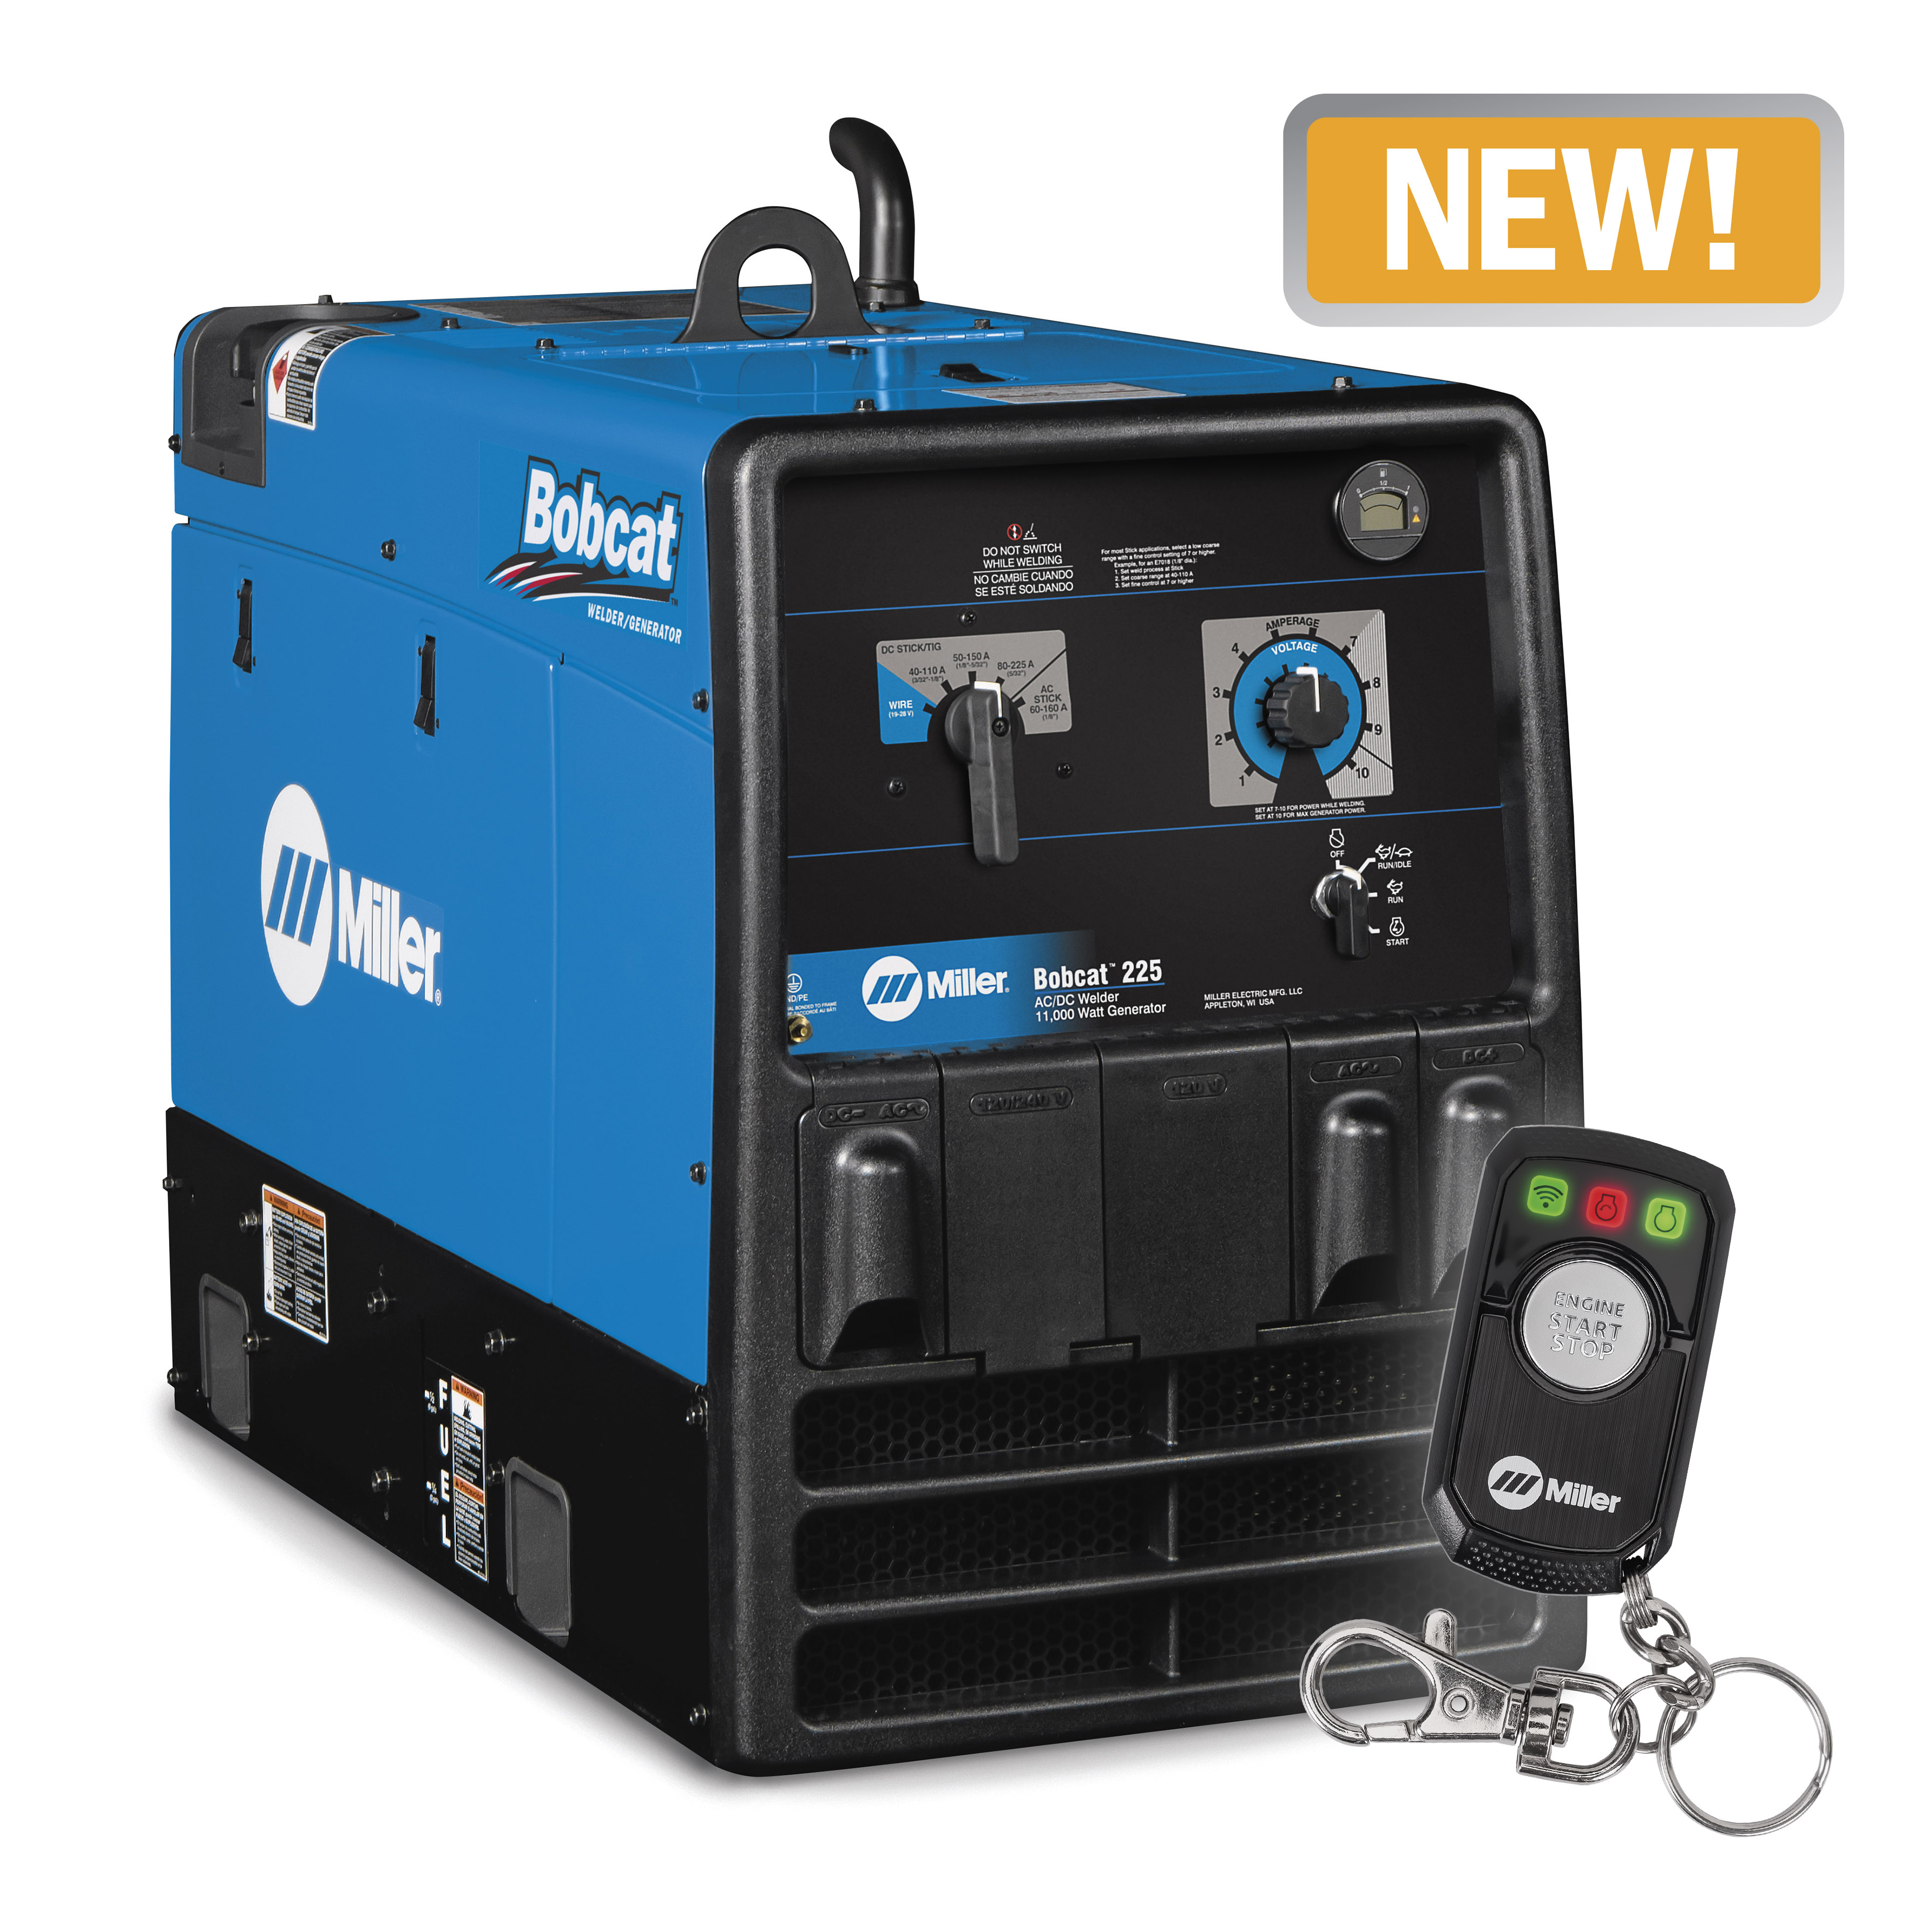 Bobcat™ 225 with Remote Start/Stop